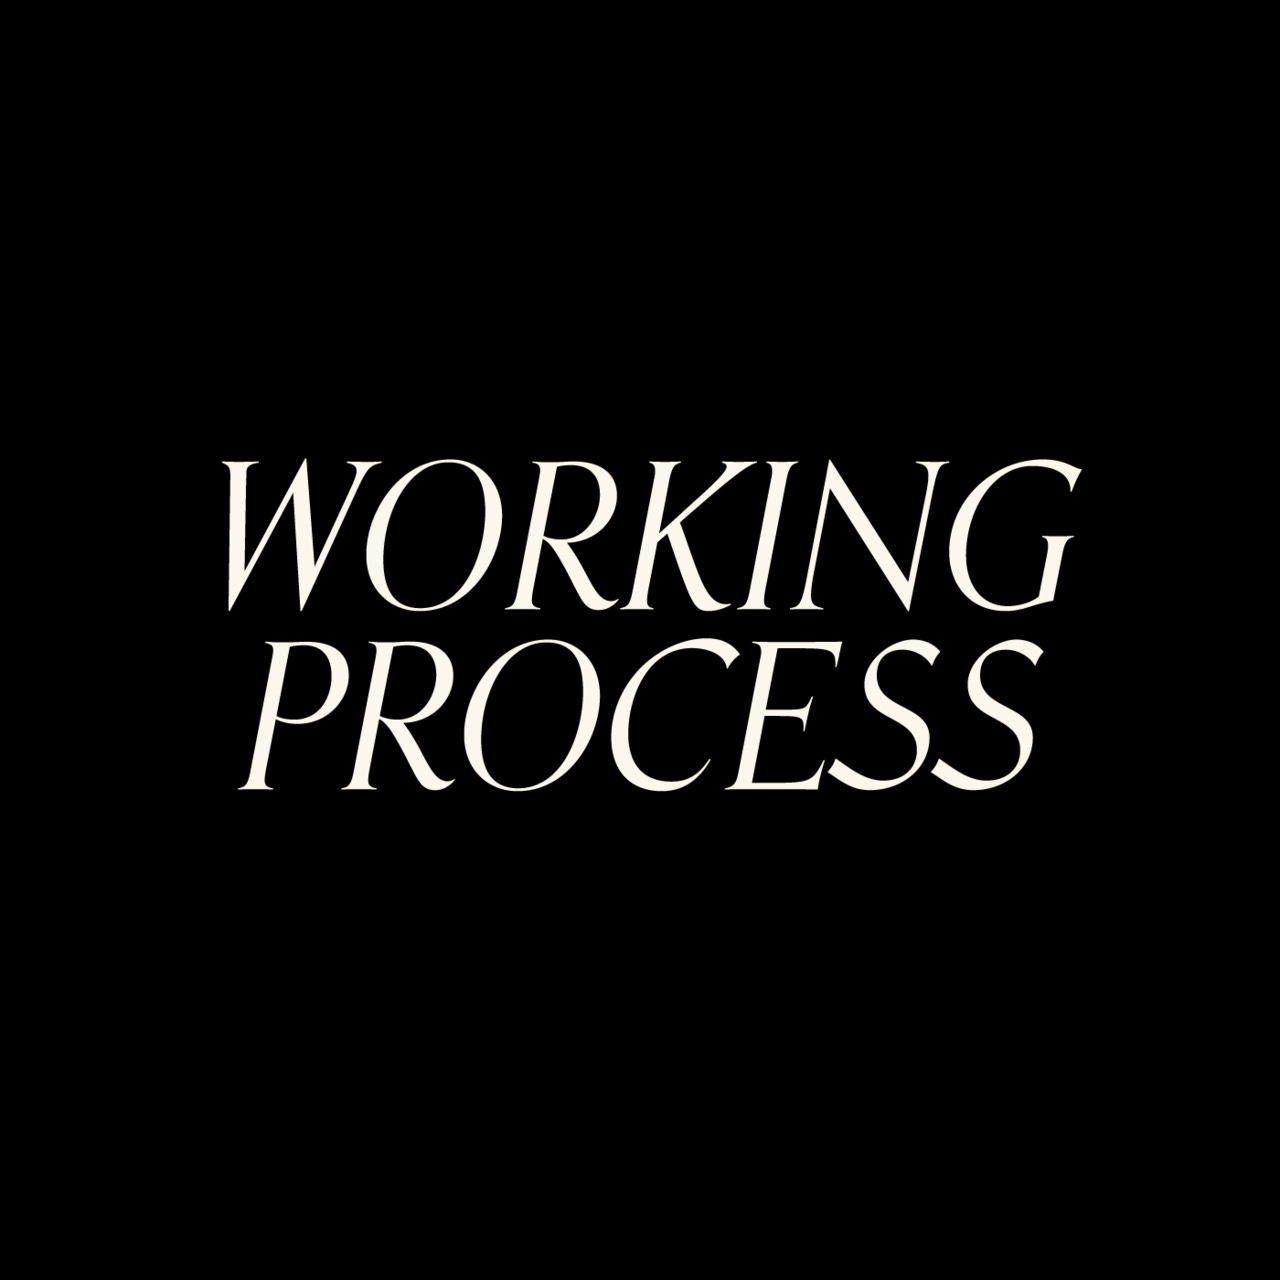 Artwork for WORKING PROCESS